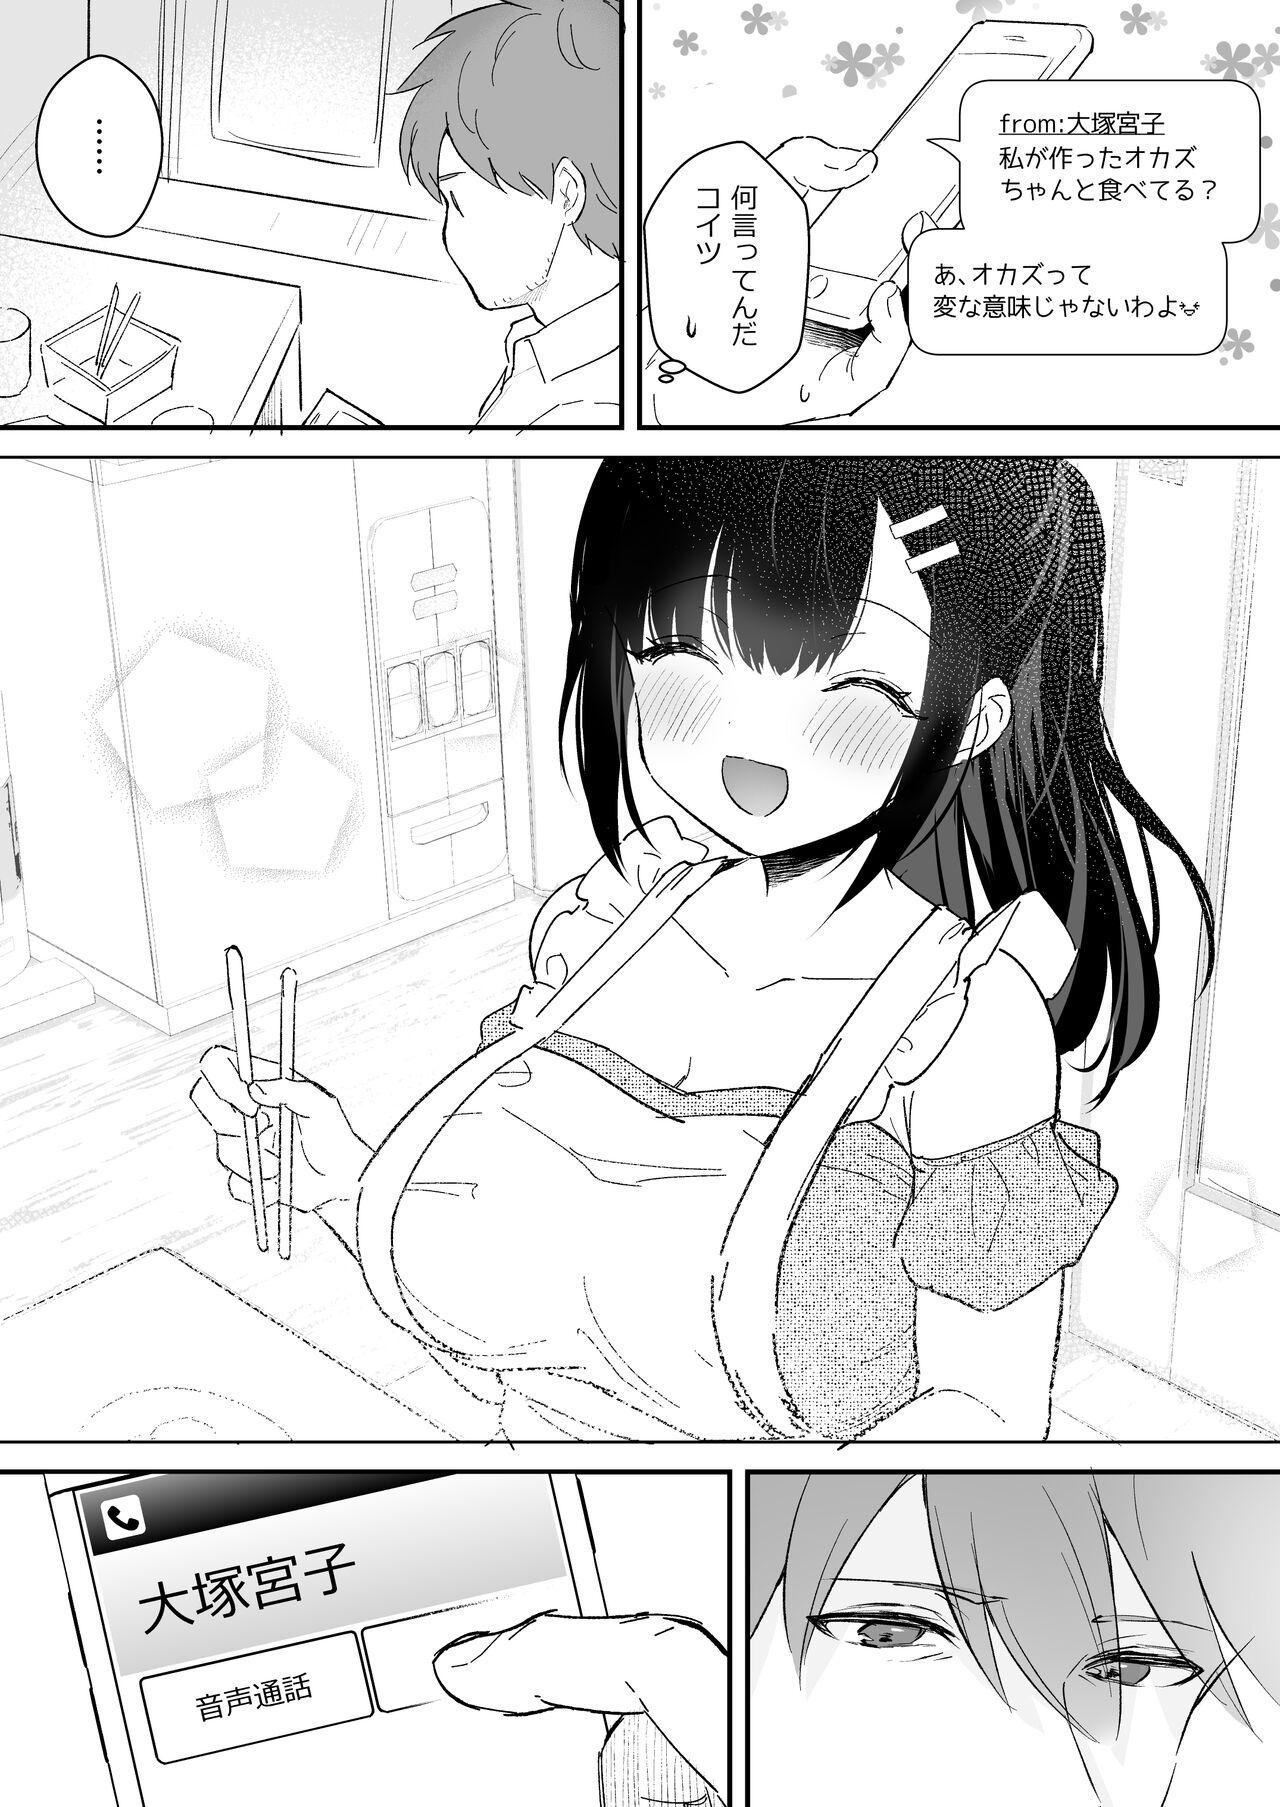 Girl Fuck 『おしかけ彼女のおままごと』の小ネタ没ネタ漫画 Sixtynine - Page 15